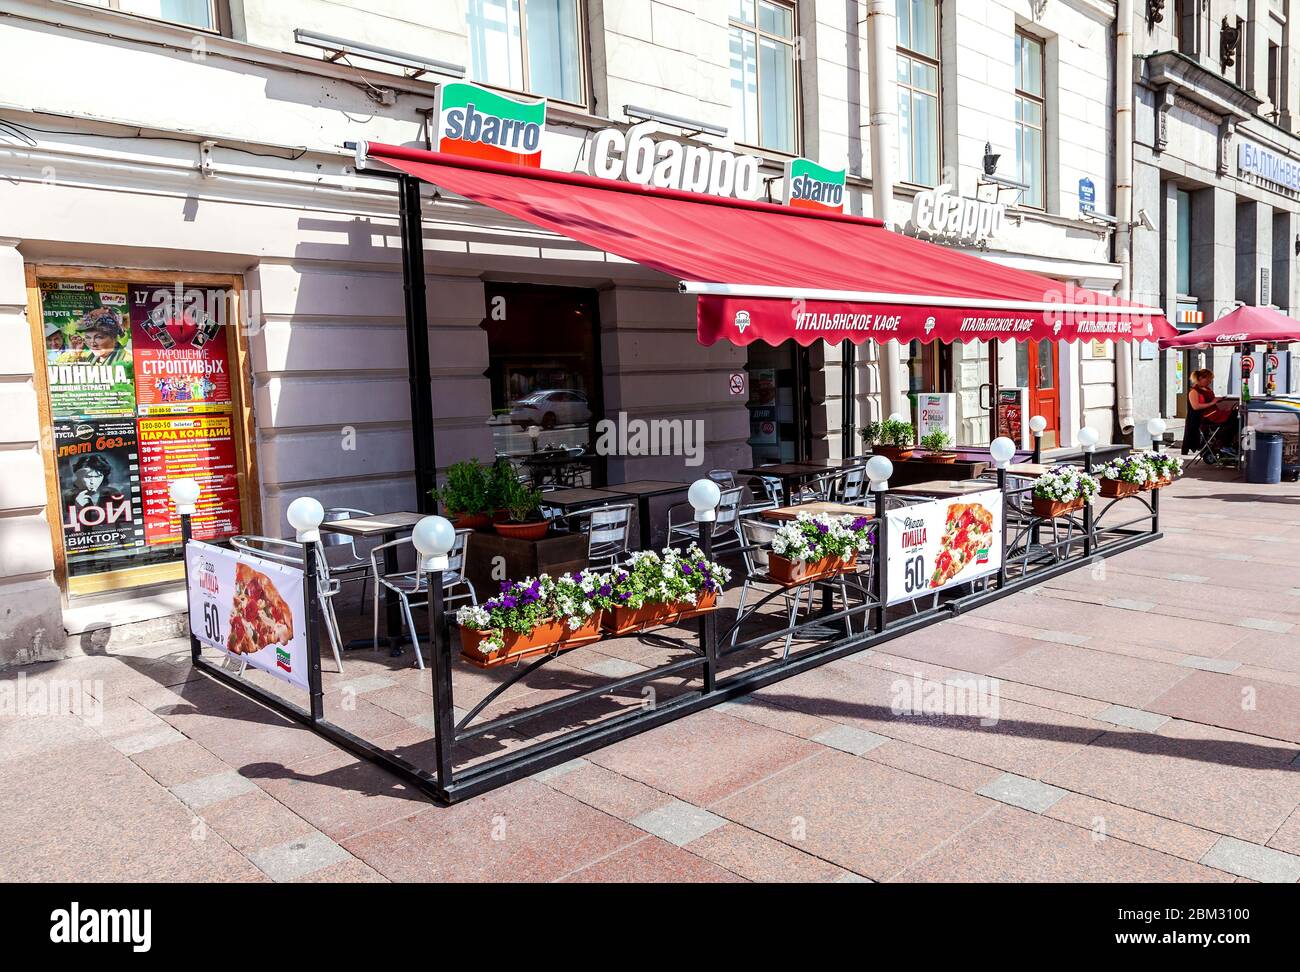 St Petersburg, Russia - August 5, 2015: Traditional summer street Italian cafe Sbarro in summer sunny day Stock Photo